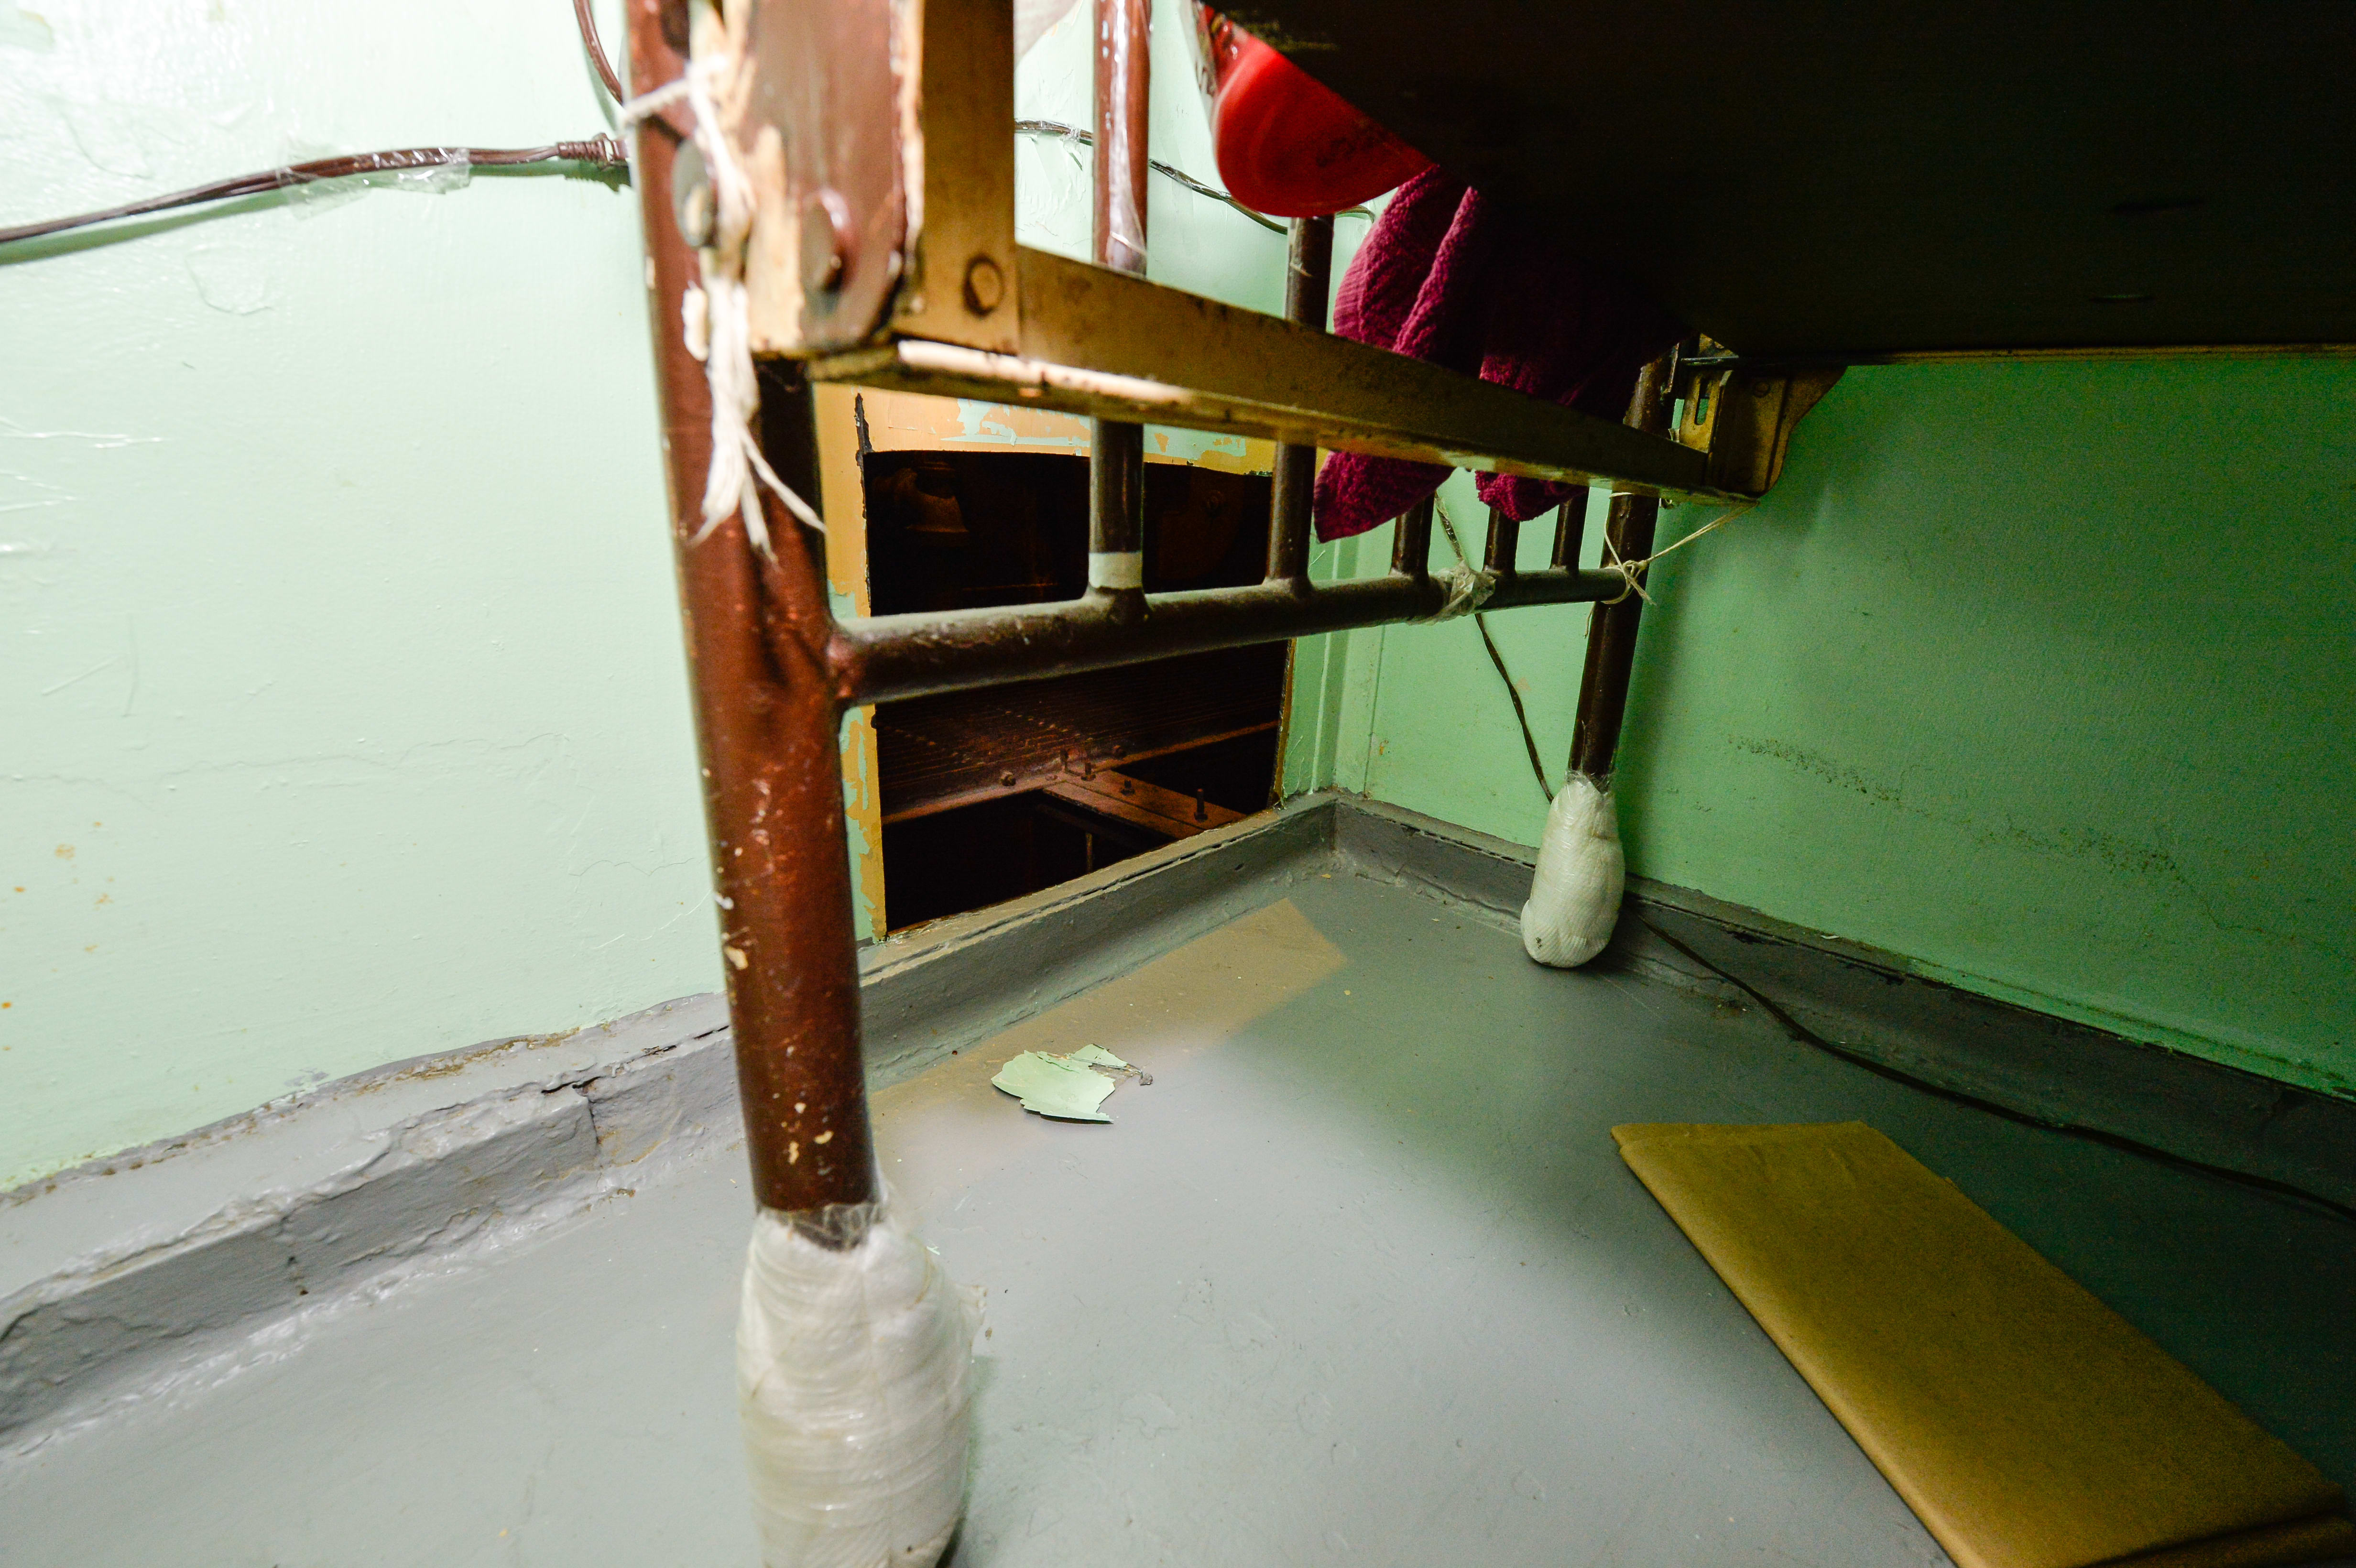 A handout photo shows a hole cut from a cell as part of the escape in Dannemora.